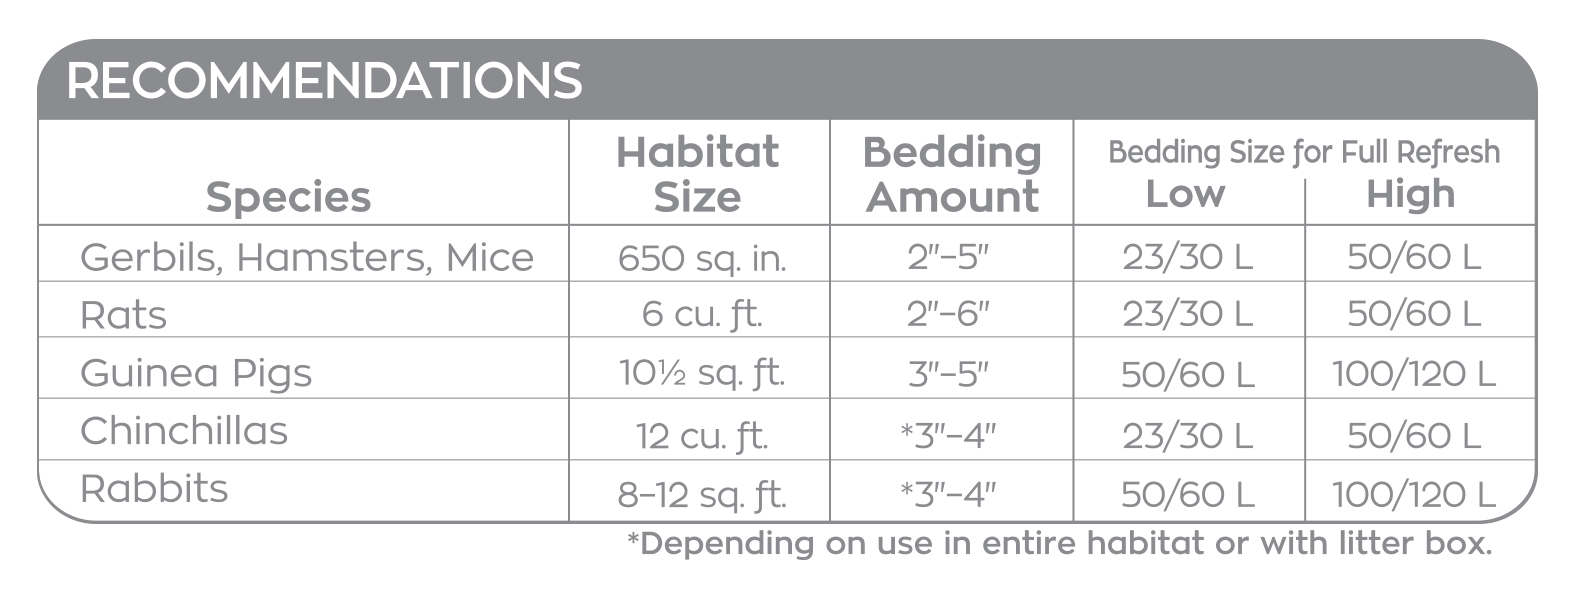 small animal carefresh bedding recommendations